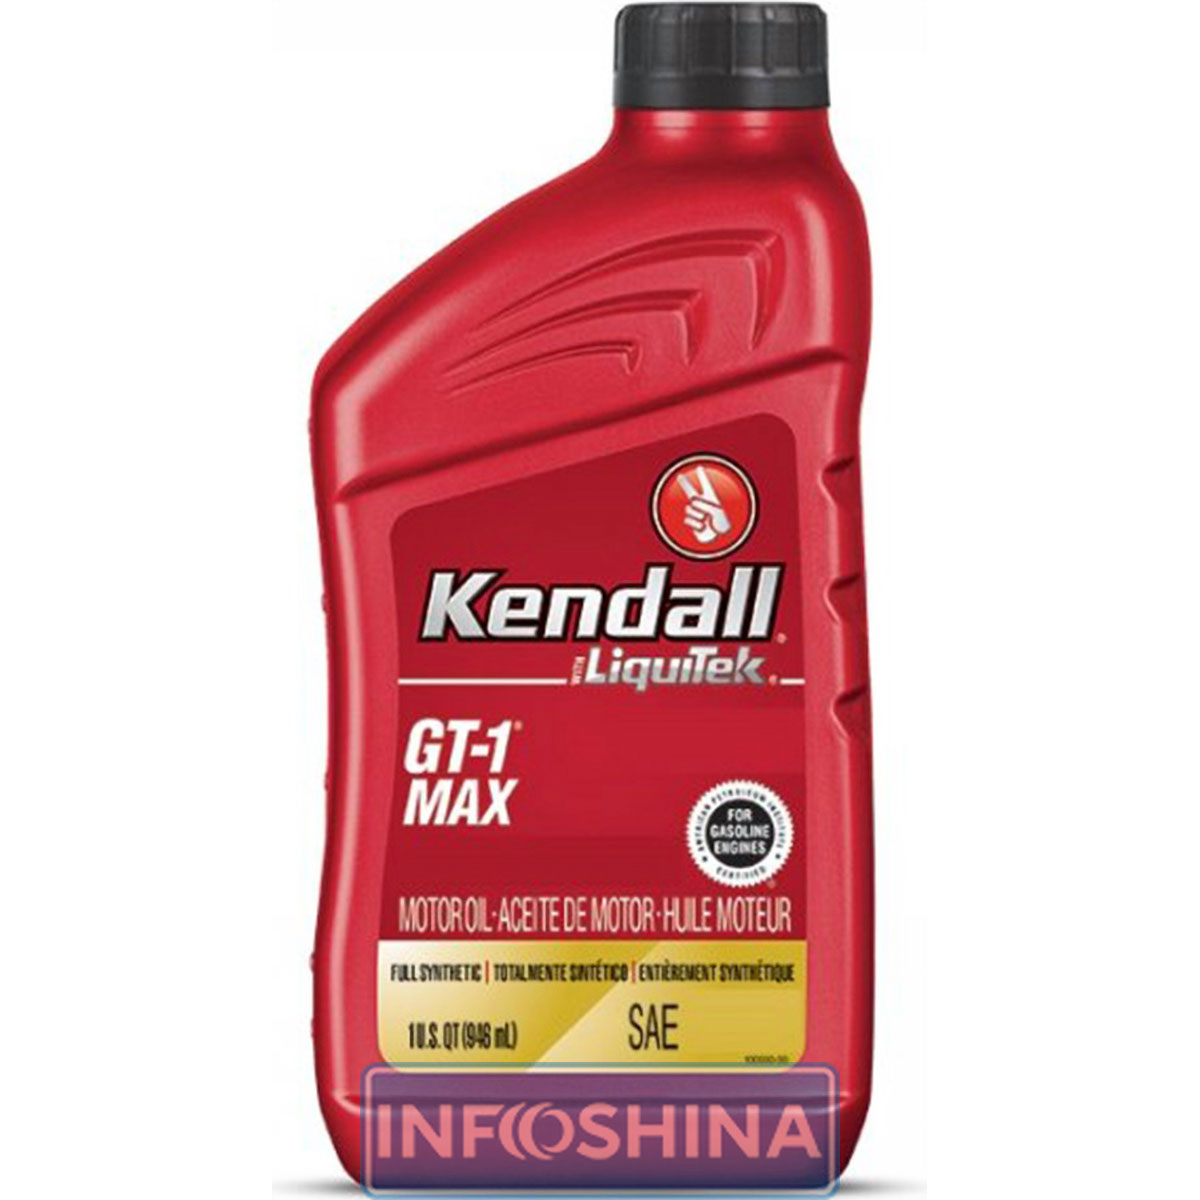 Kendall GT-1 MAX Premium Full Syntethic 5W-20